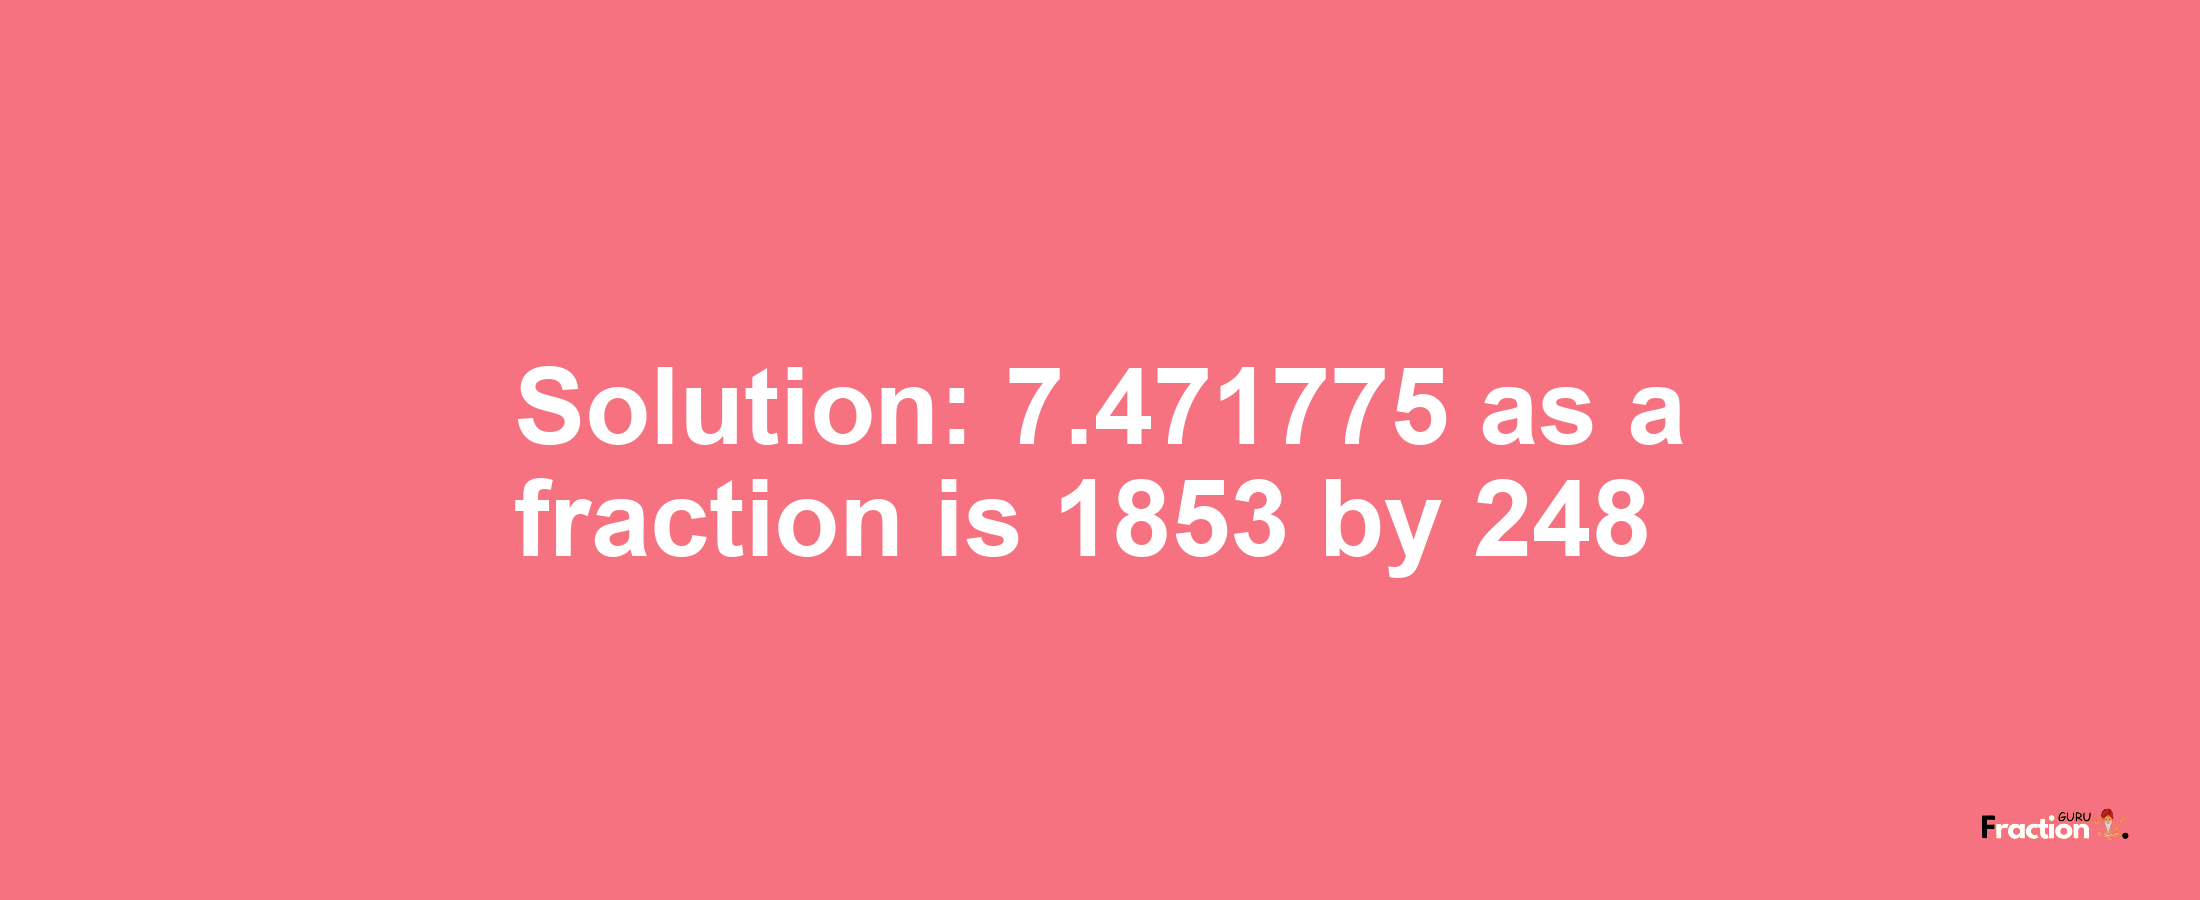 Solution:7.471775 as a fraction is 1853/248